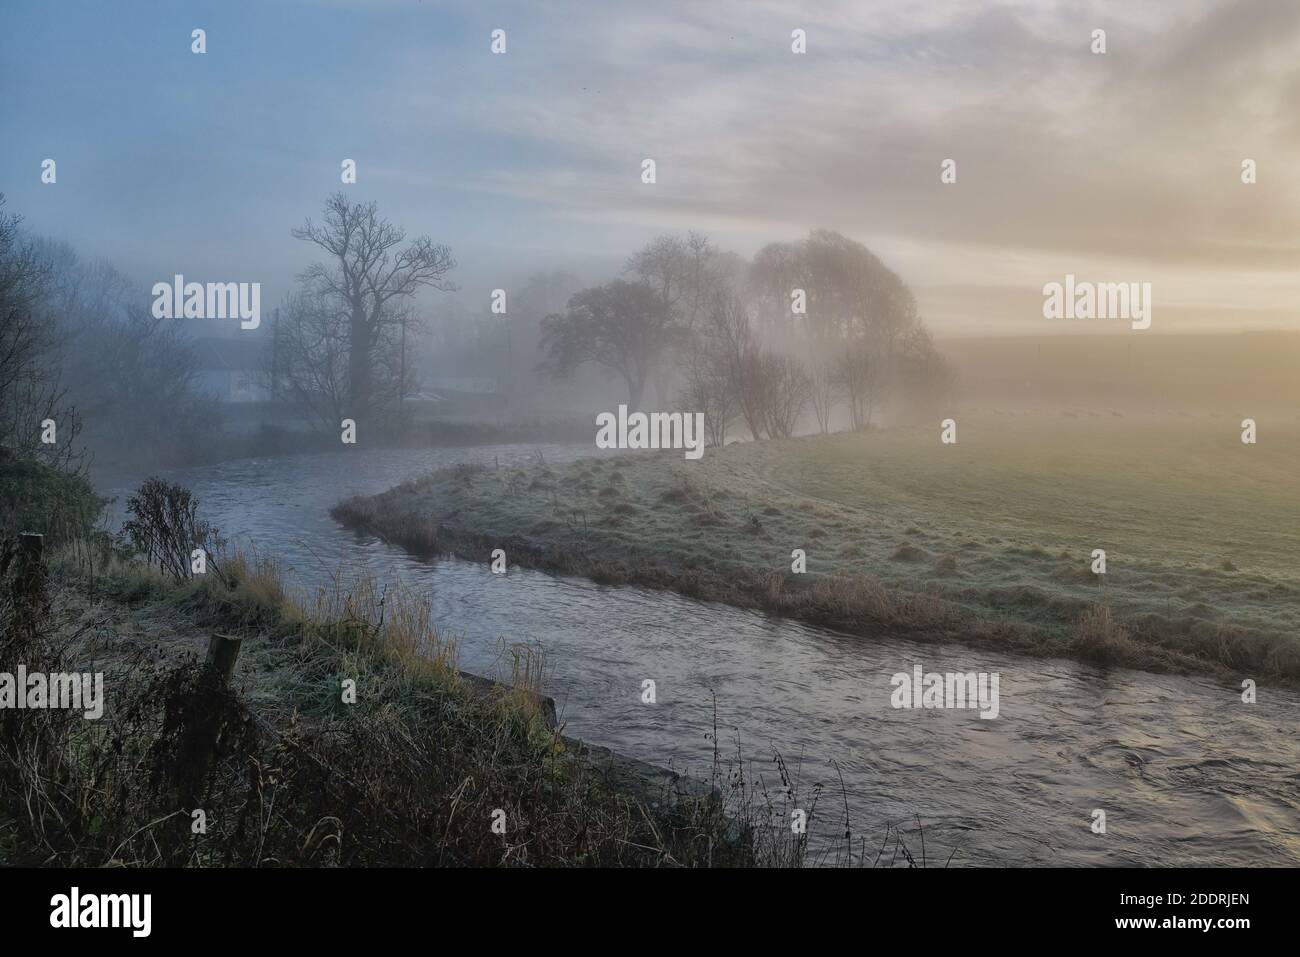 Early Morning view of the River Doon in the Ayrshire village of Dalrymple, Scotland Stock Photo